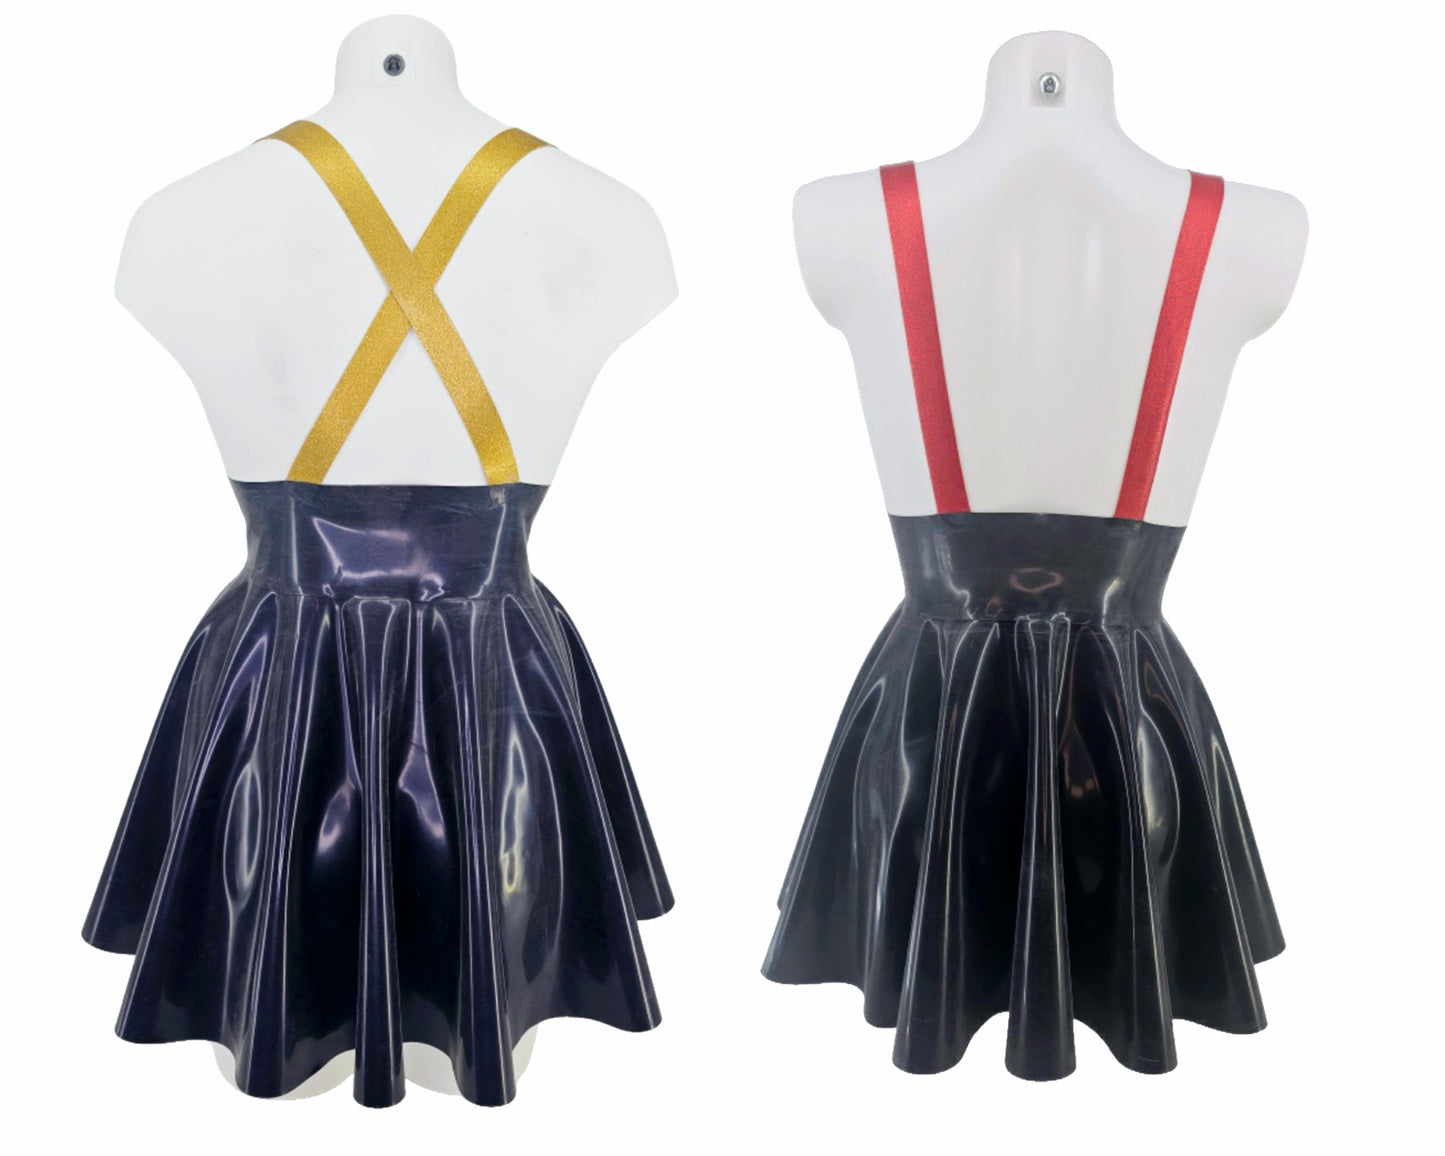 High waist latex full circle mini skater skirt with adjustable braces (silver, gold or rainbow rings)